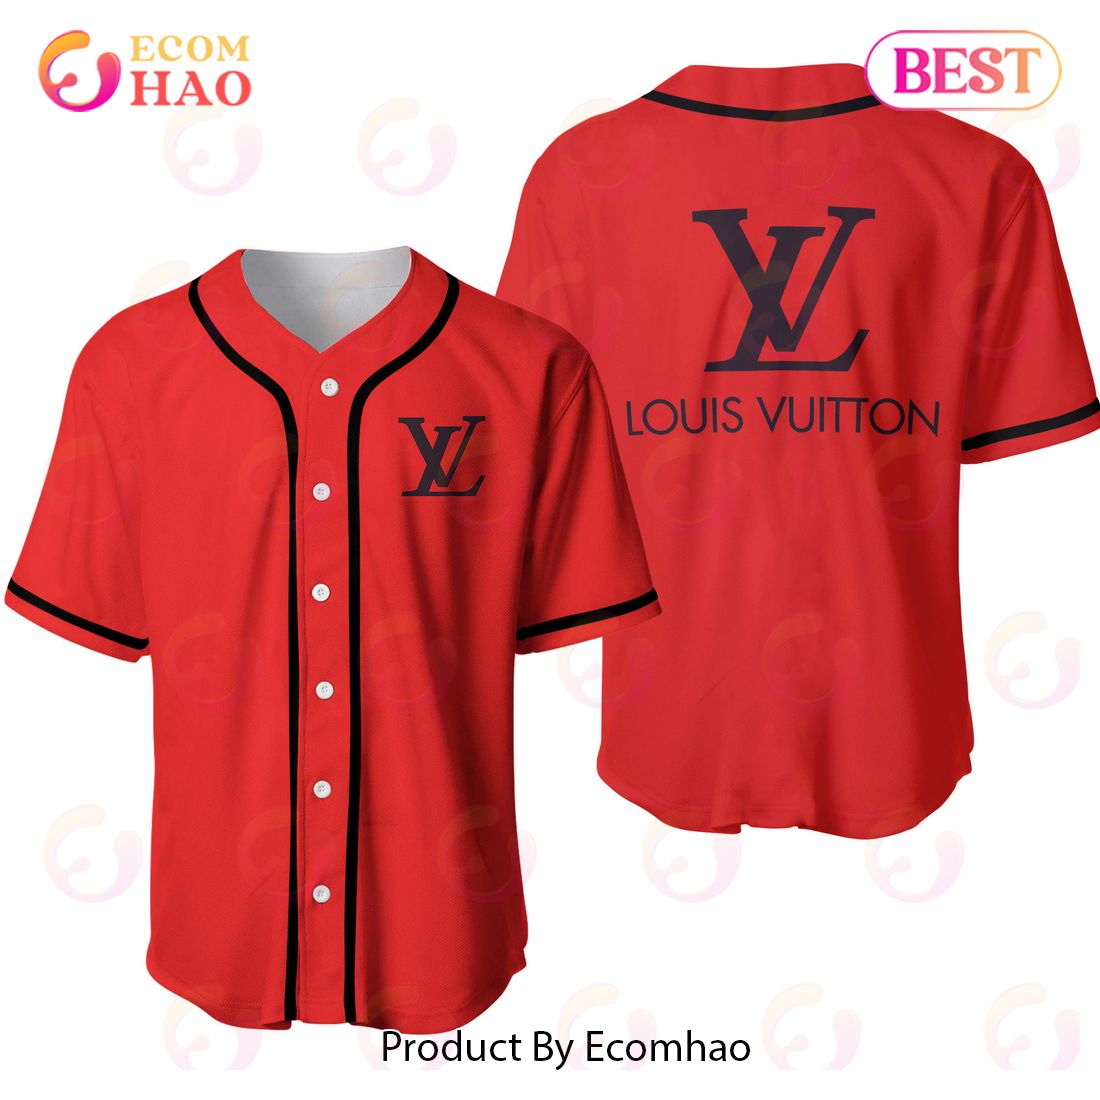 Louis Vuitton Red Mix Black Luxury Brand Jersey Limited Edition